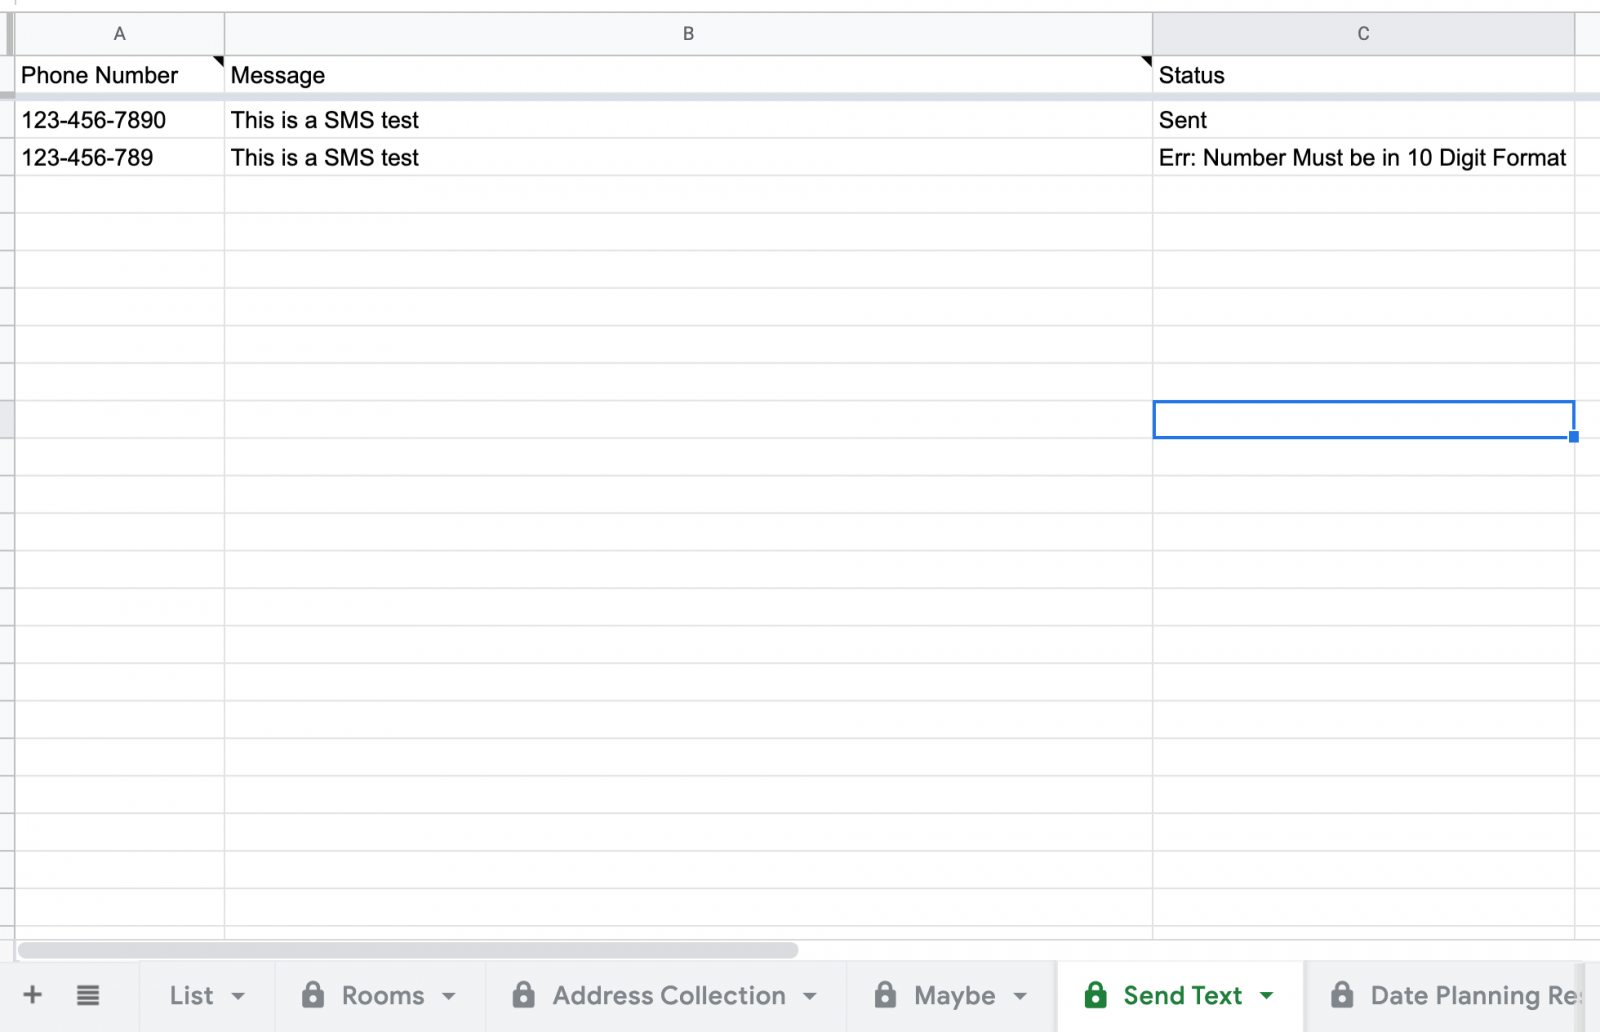 Setup your google sheet with 3 columns: Phone Number, Message, Status